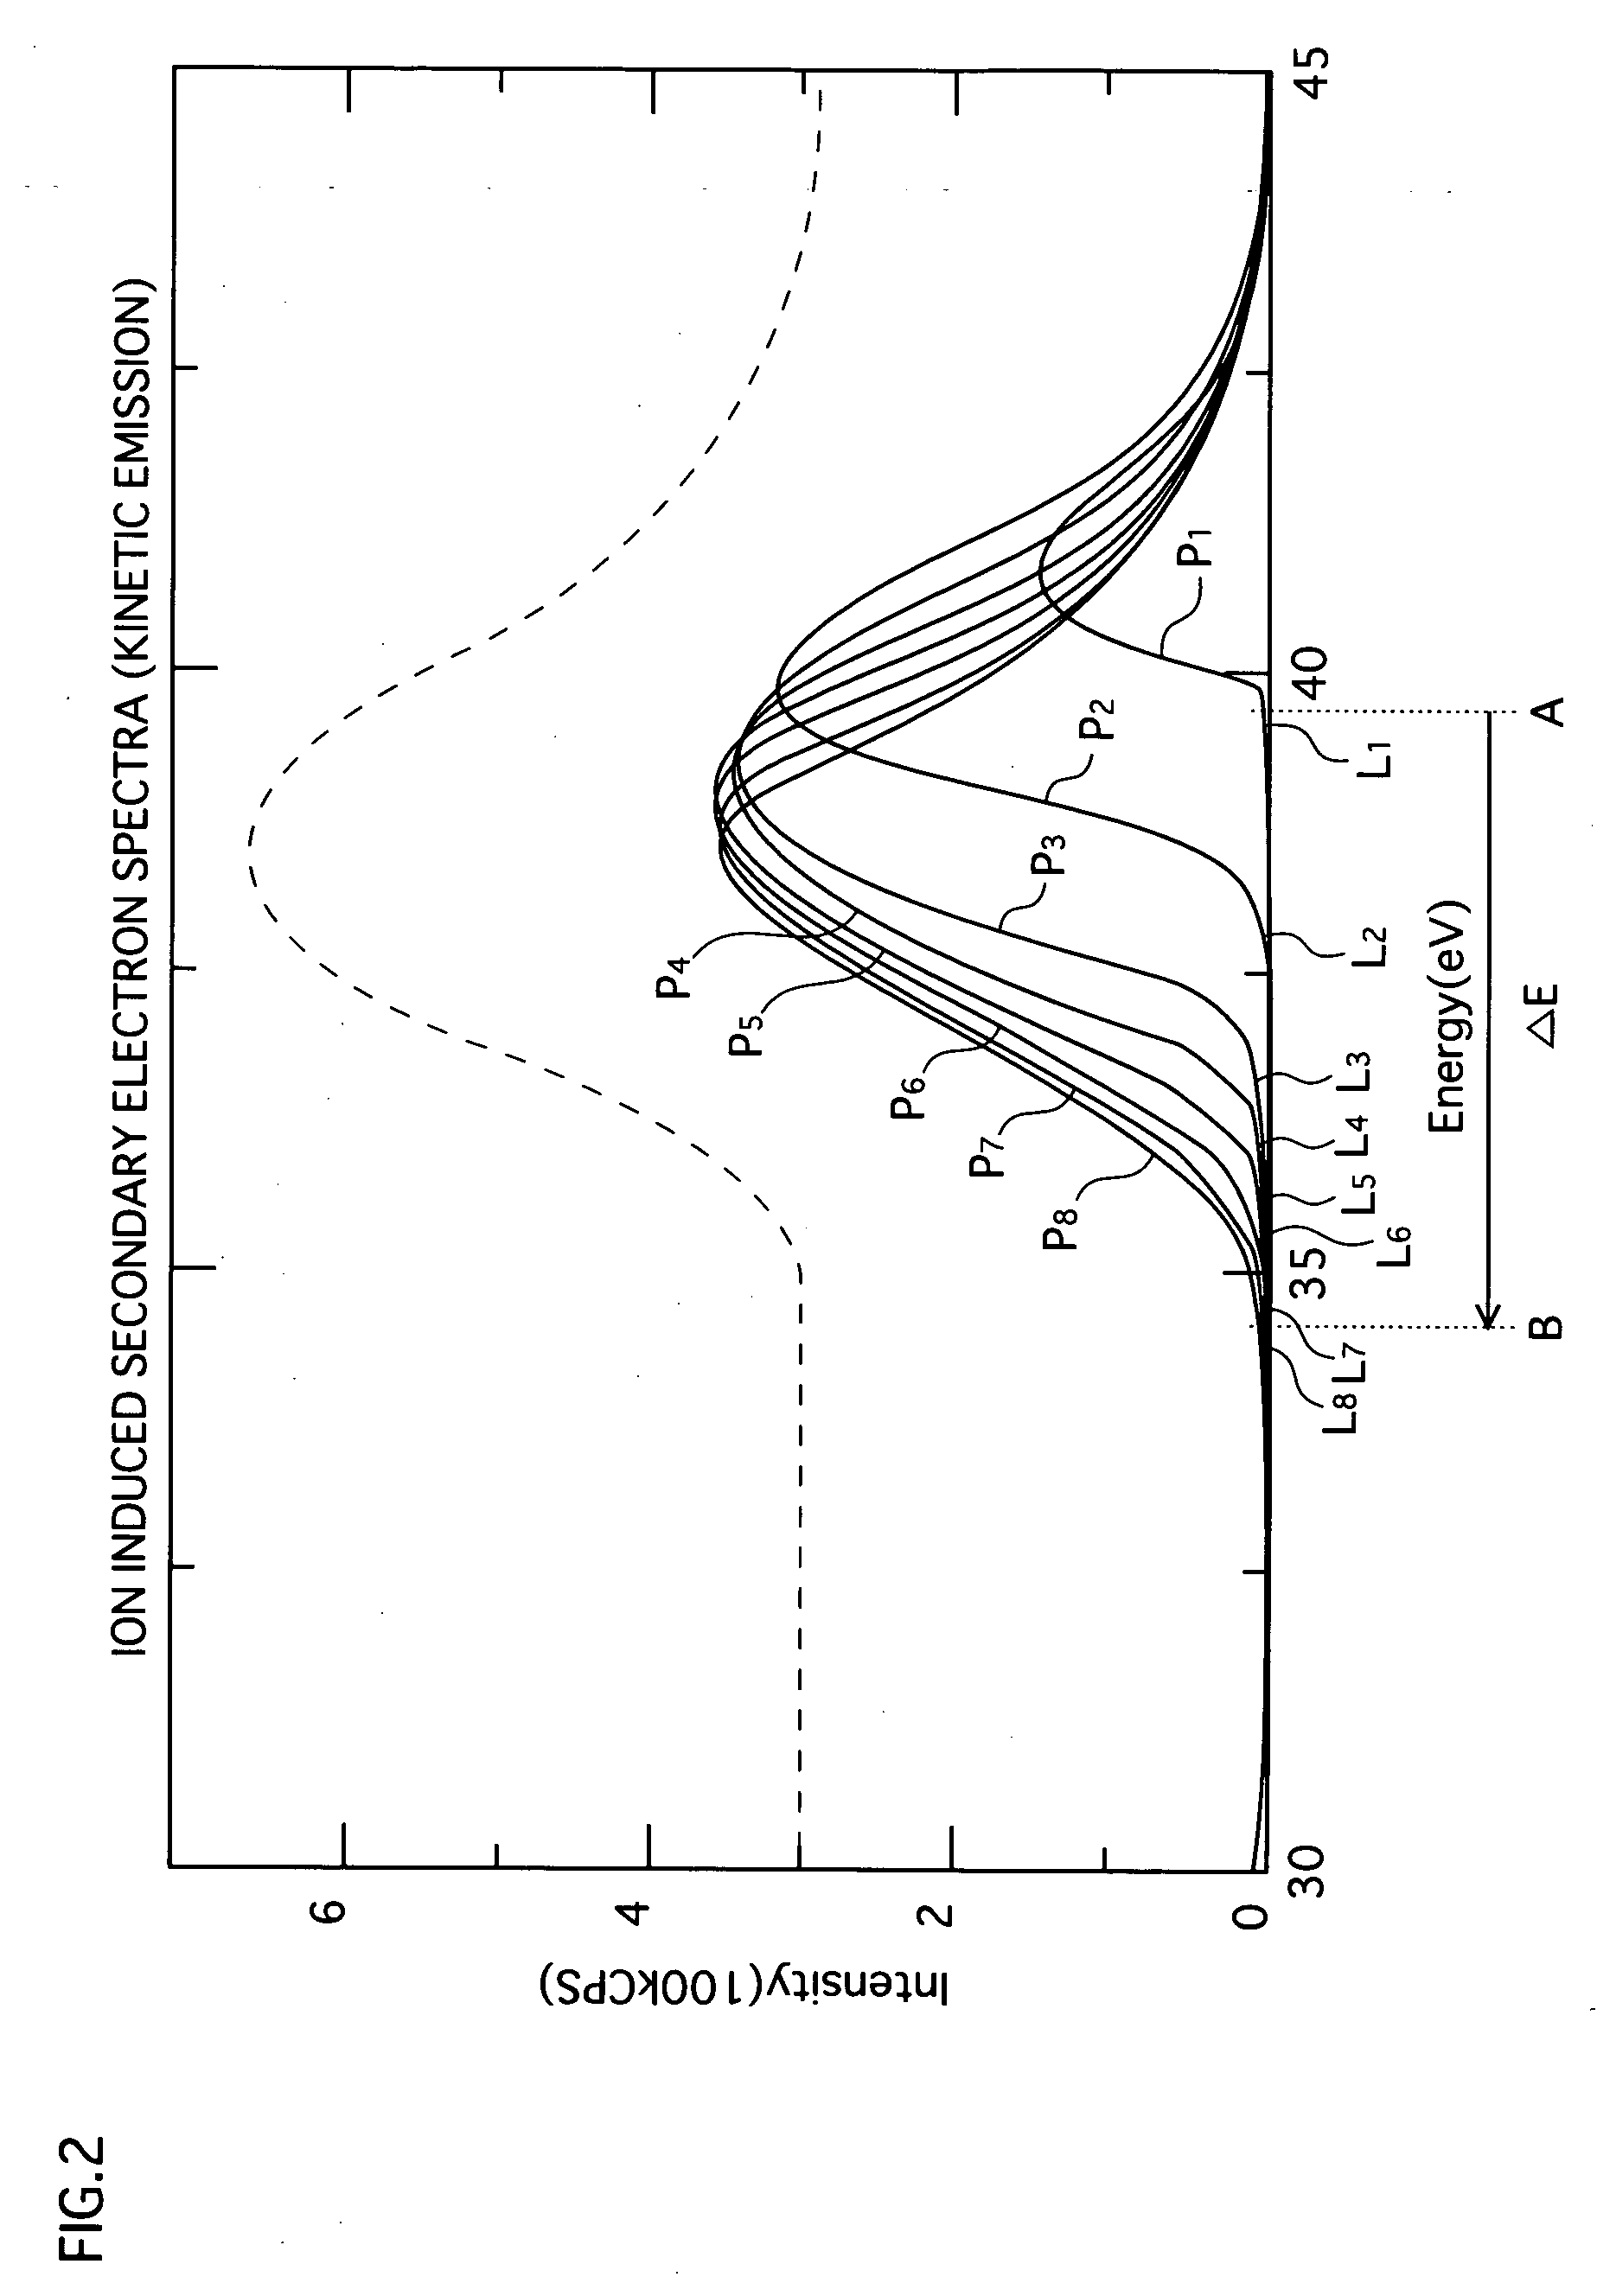 Insulating film measuring device, insulating film measuring method, insulating film evaluating device, insulating film evaluating method, substrate for electric discharge display element, and plasma display panel